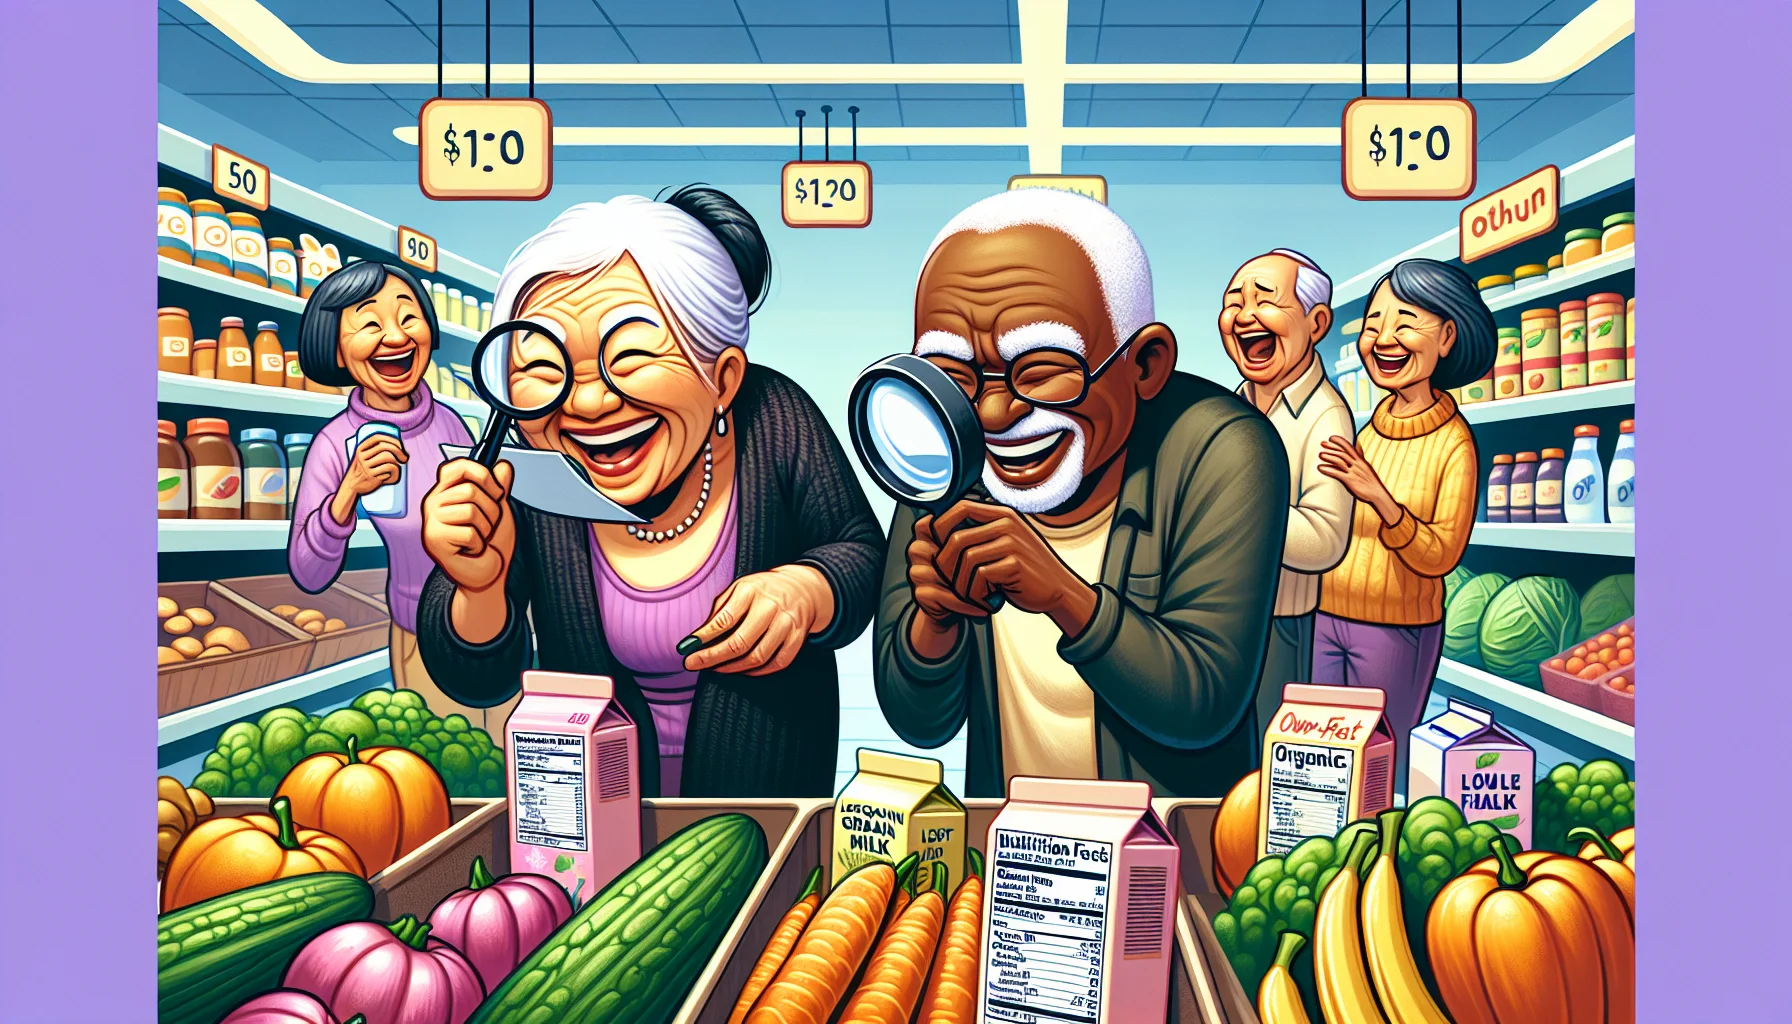 Illustrate a comical scene in a grocery store. An elderly Asian woman, full of life, humorously uses a magnifying glass to scrutinize the nutritional facts on a package of organic vegetables. Meanwhile, a lighthearted African American senior man is struggling to reach for a bottle of low-fat milk on the top shelf, and a Caucasian elderly couple are chuckling as they compare two similar brands of whole grain bread for their diet. They're surrounded by a vibrant array of healthy foods illustrating their active involvement in maintaining a balanced diet.